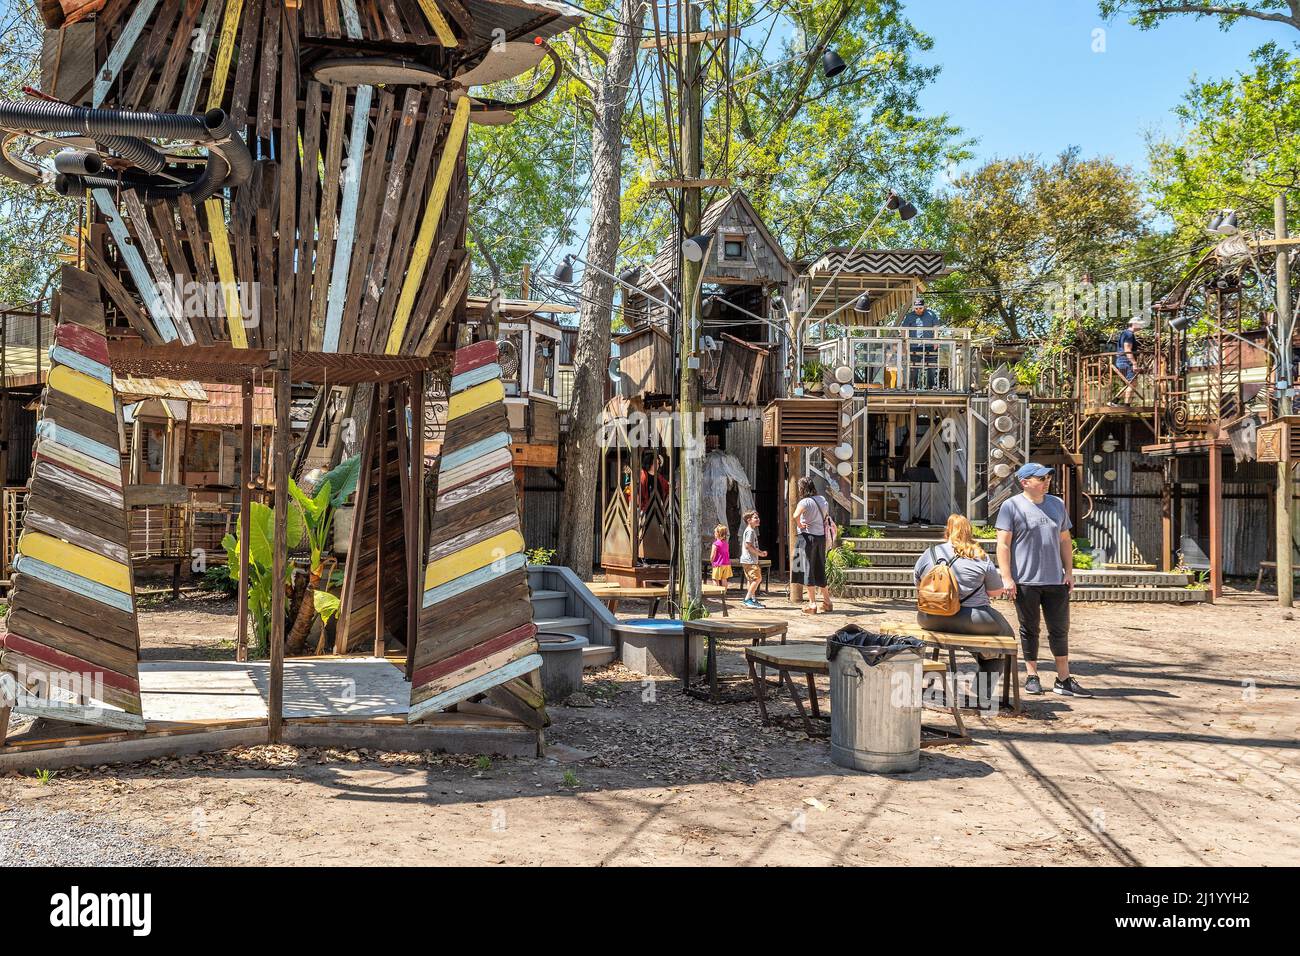 The Music Box Village interactive art and music performance site in the Bywater neighborhood of New Orleans, Louisiana, USA. Stock Photo